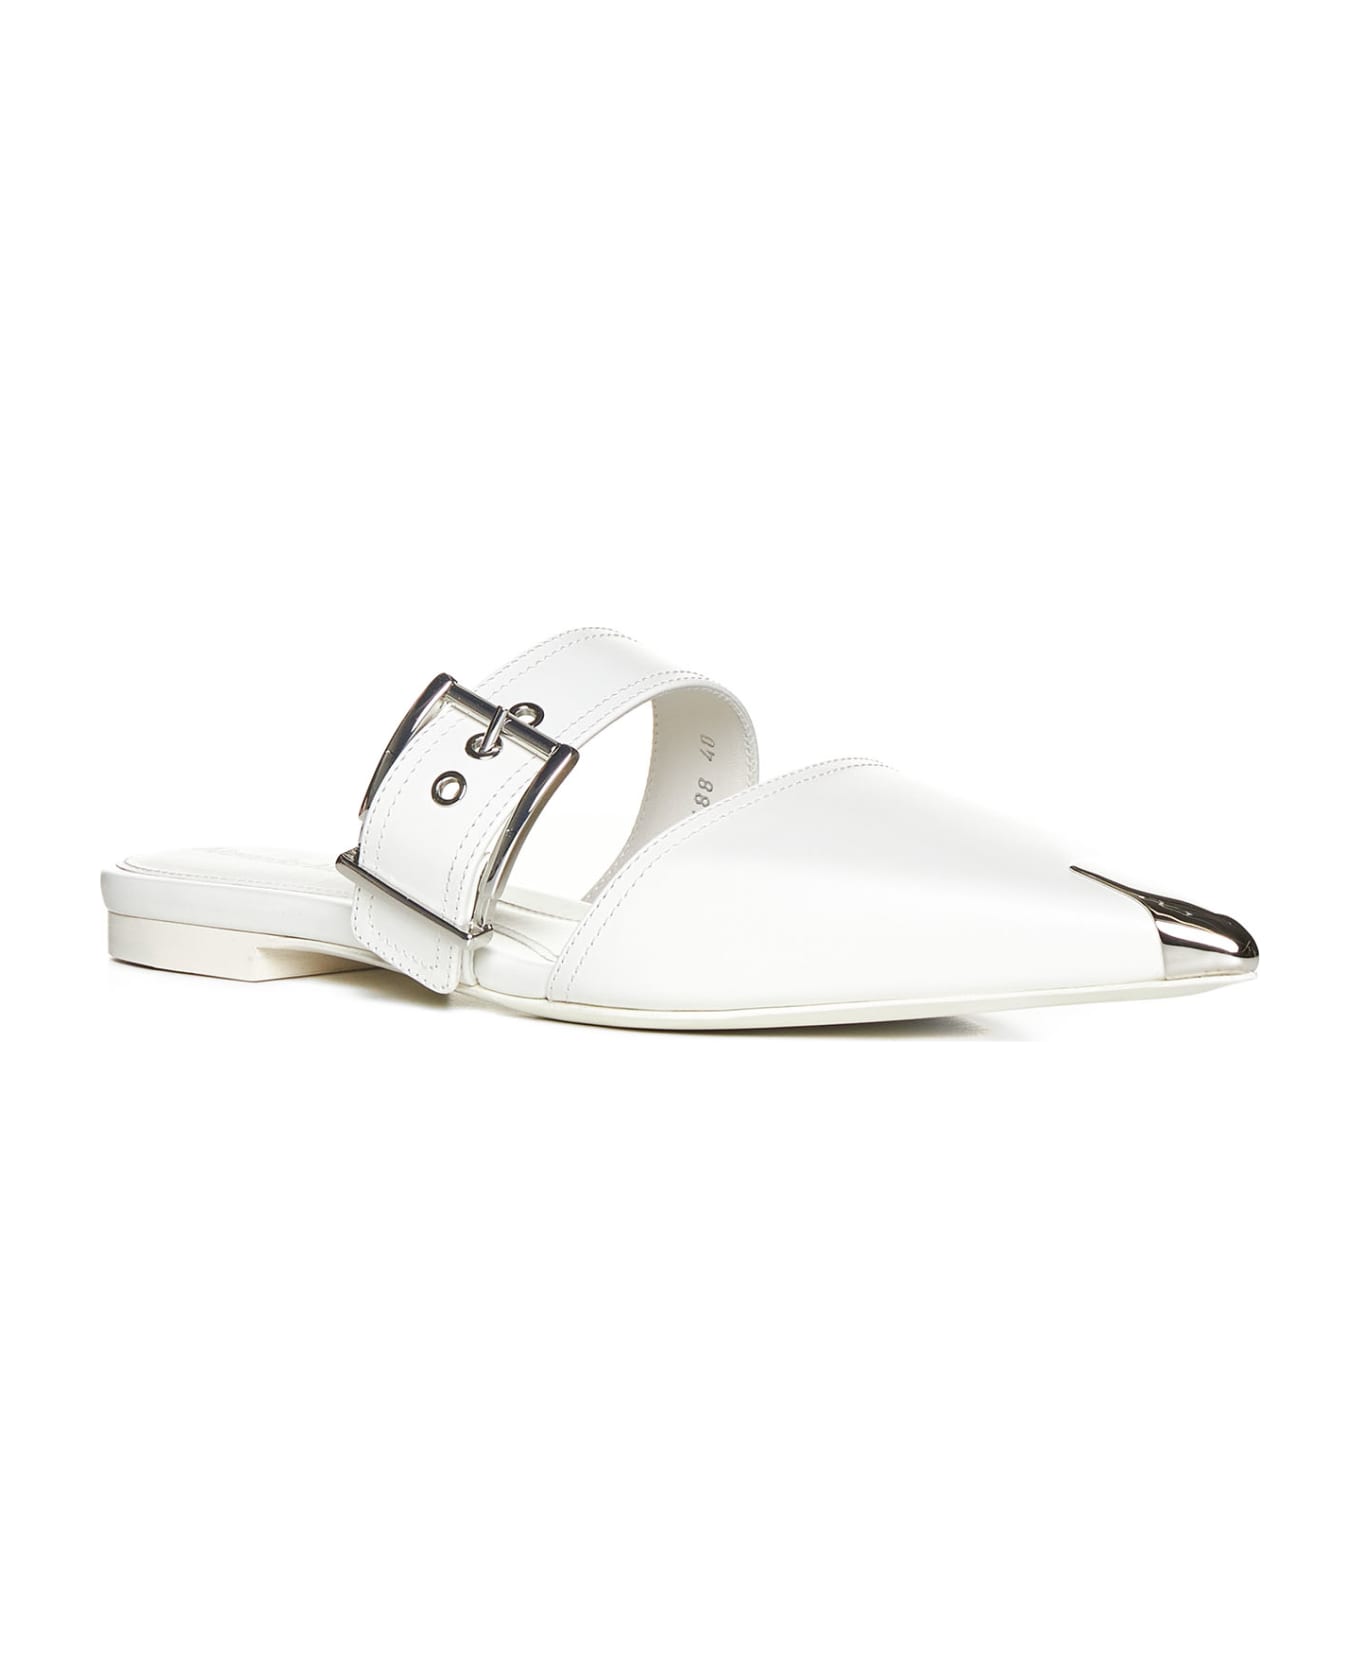 Alexander McQueen Ivory 'punk' Flat Sandals - New ivory/silver サンダル